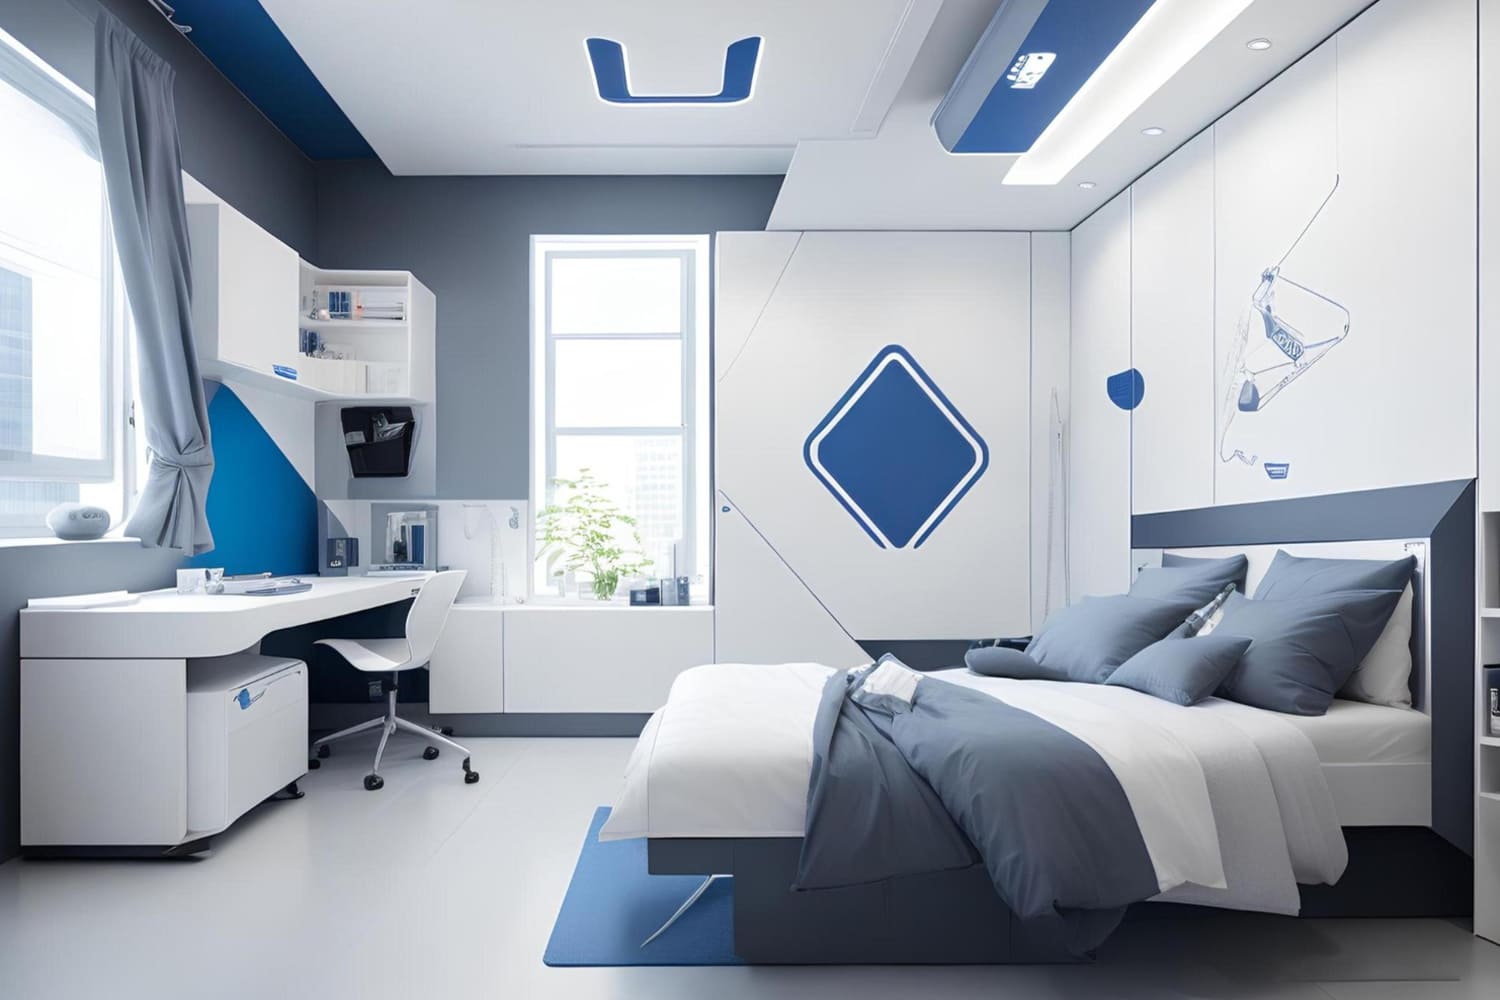 The cupboards in the bedroom are custom-designed to complement the overall aesthetic, featuring a seamless integration of blue and white finishes that matches the interiors of the bedroom.